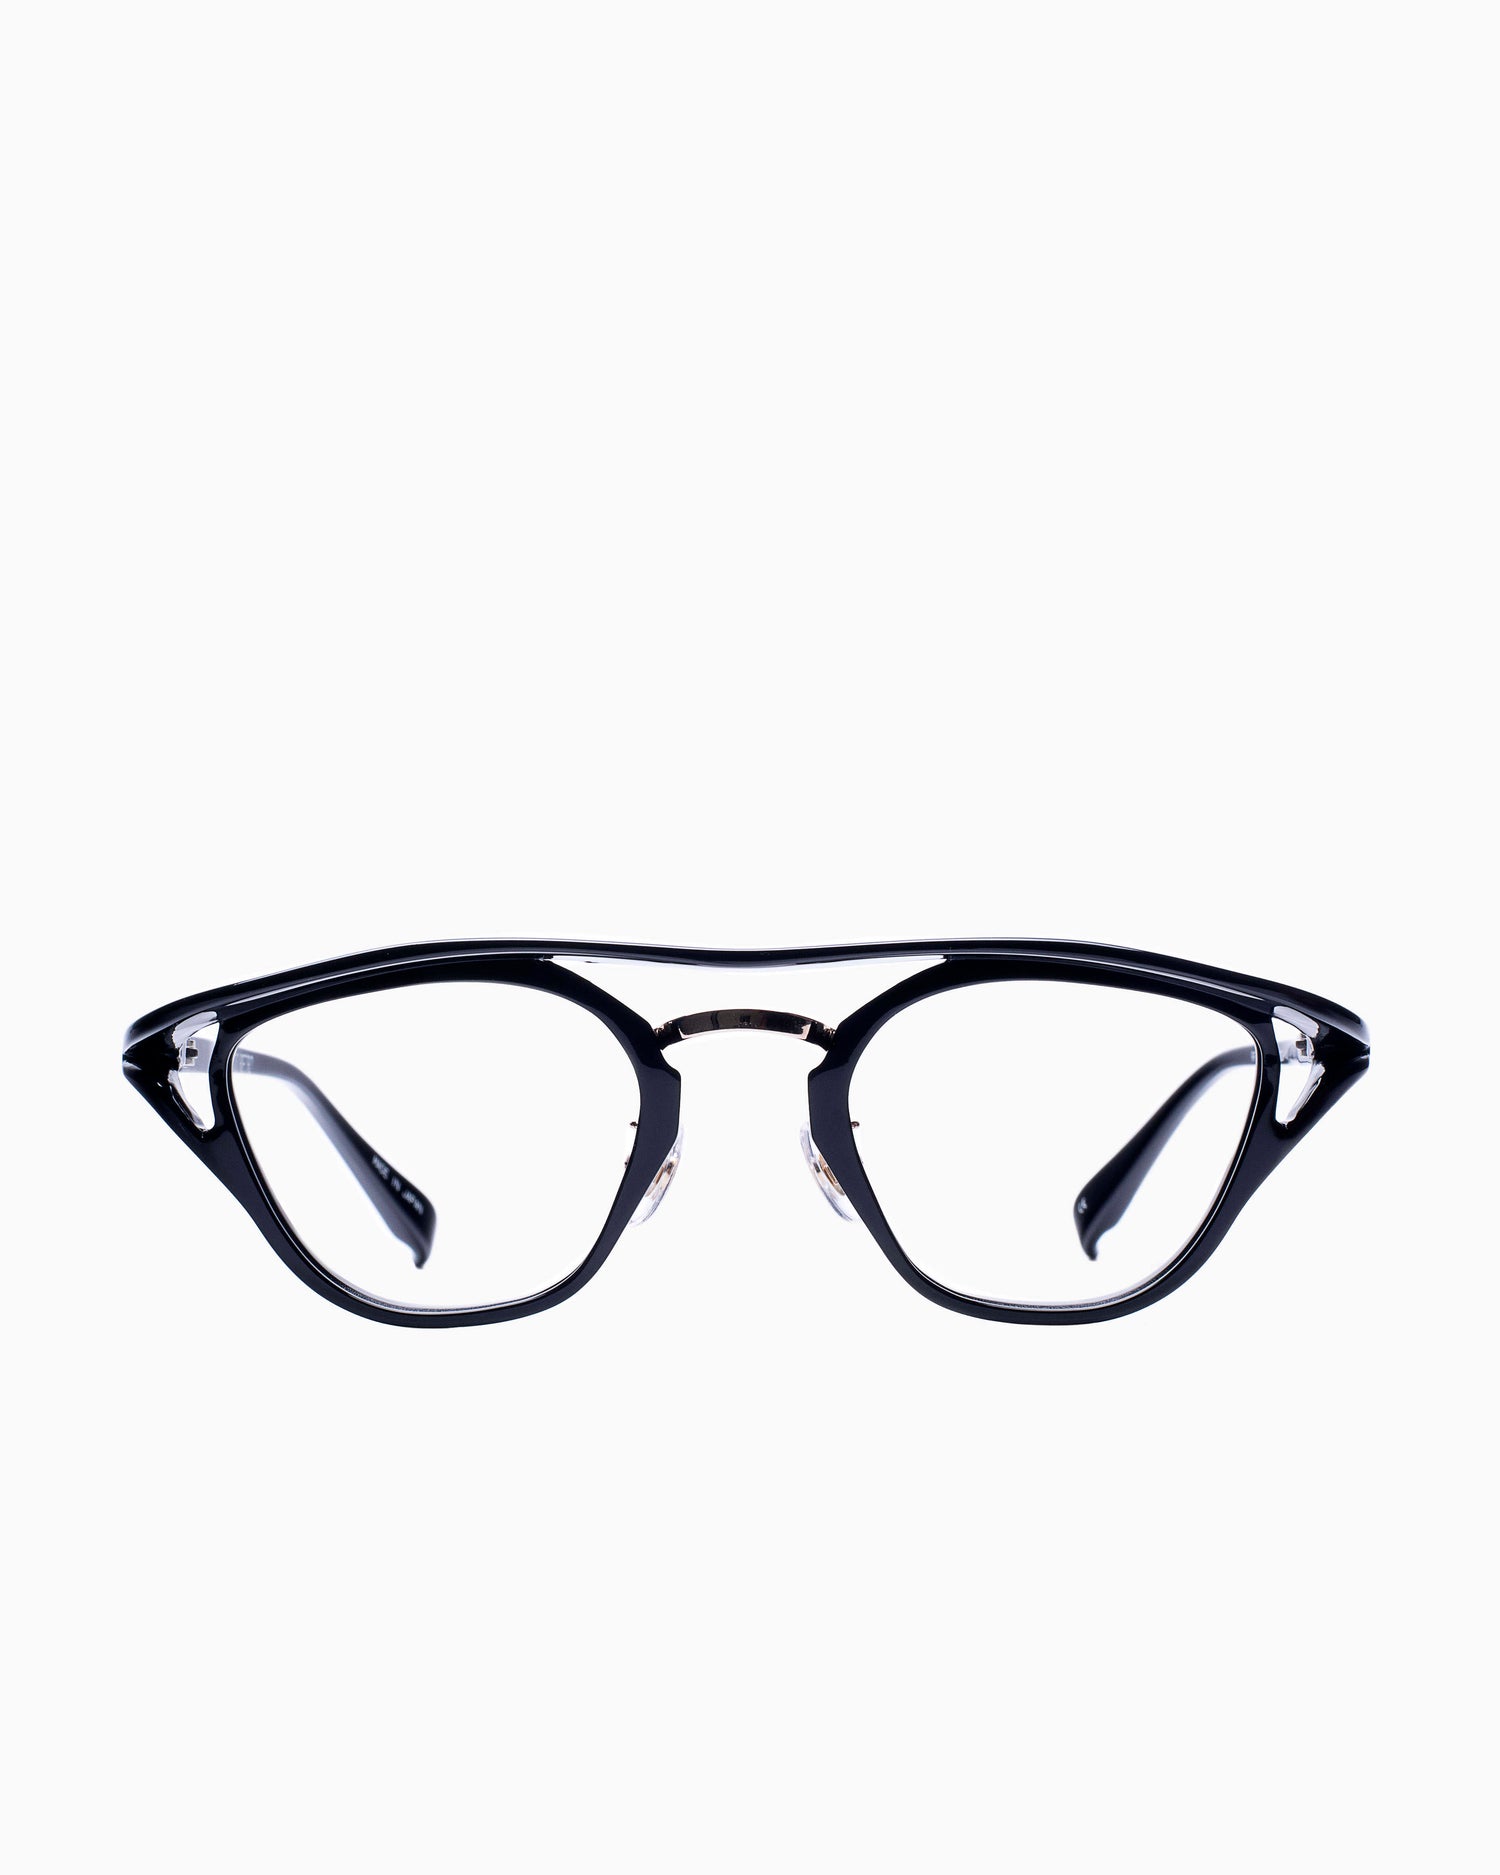 Factory 900-RF101-001 | glasses bar:  Marie-Sophie Dion